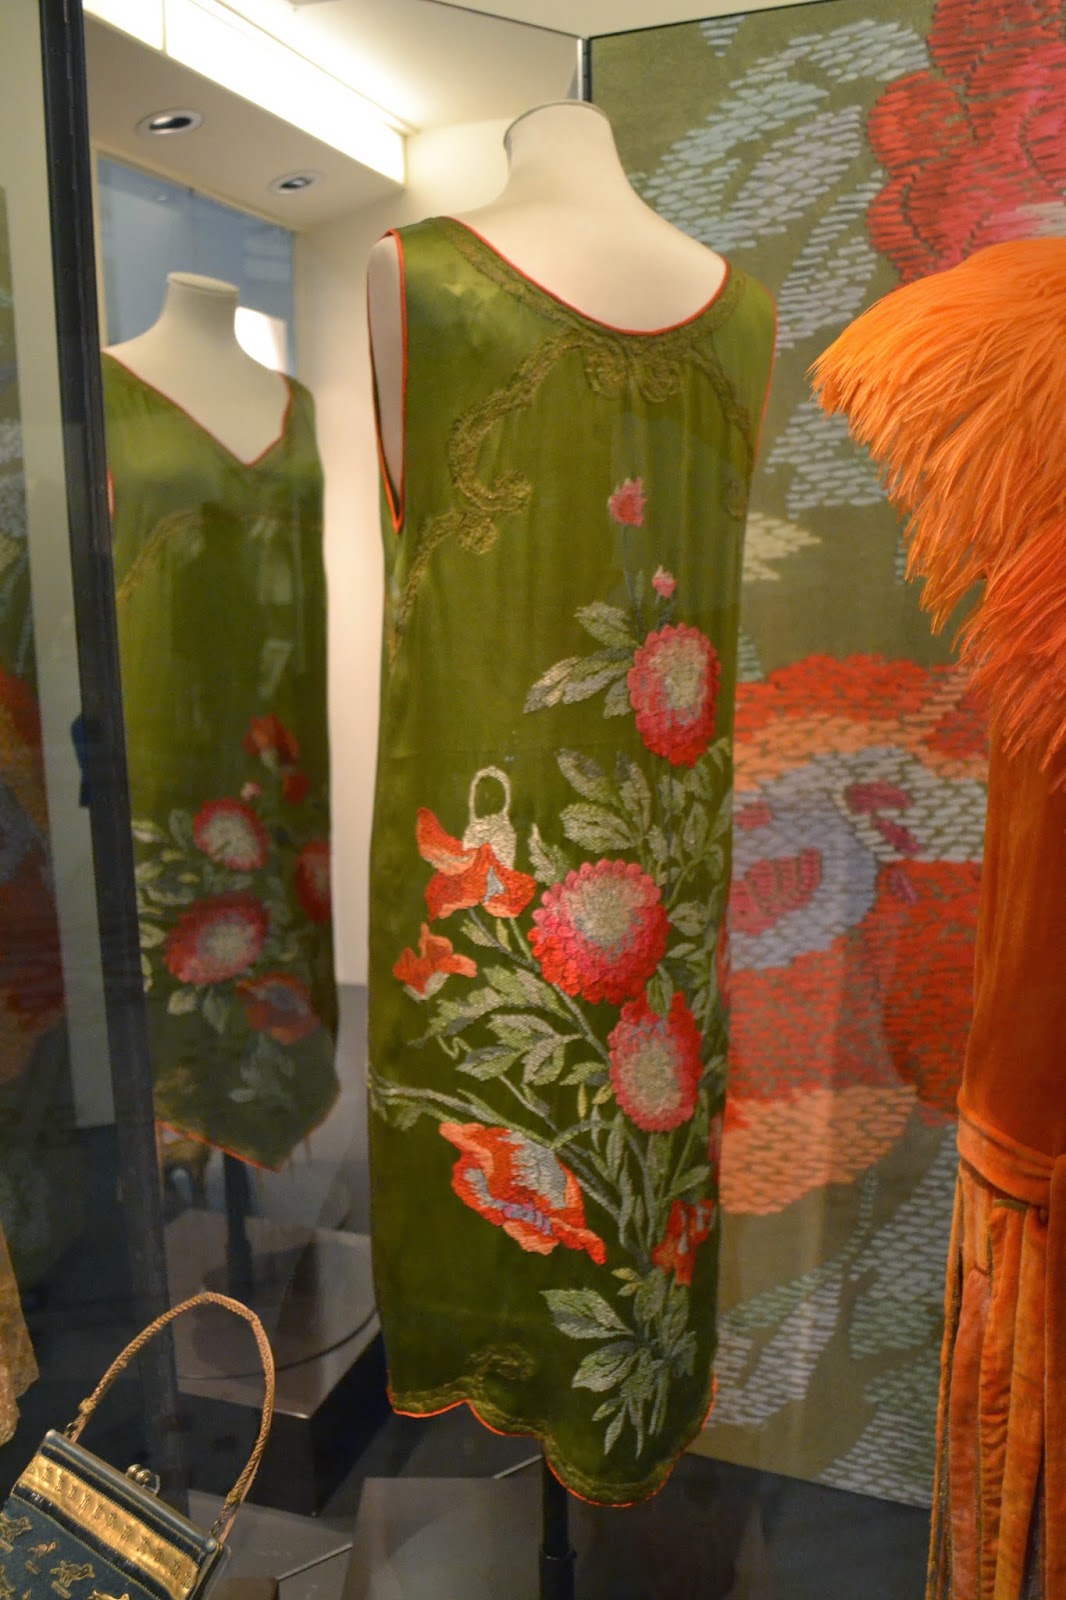 Tea with LaVera: Historical Fashion at The Victoria and Albert Museum